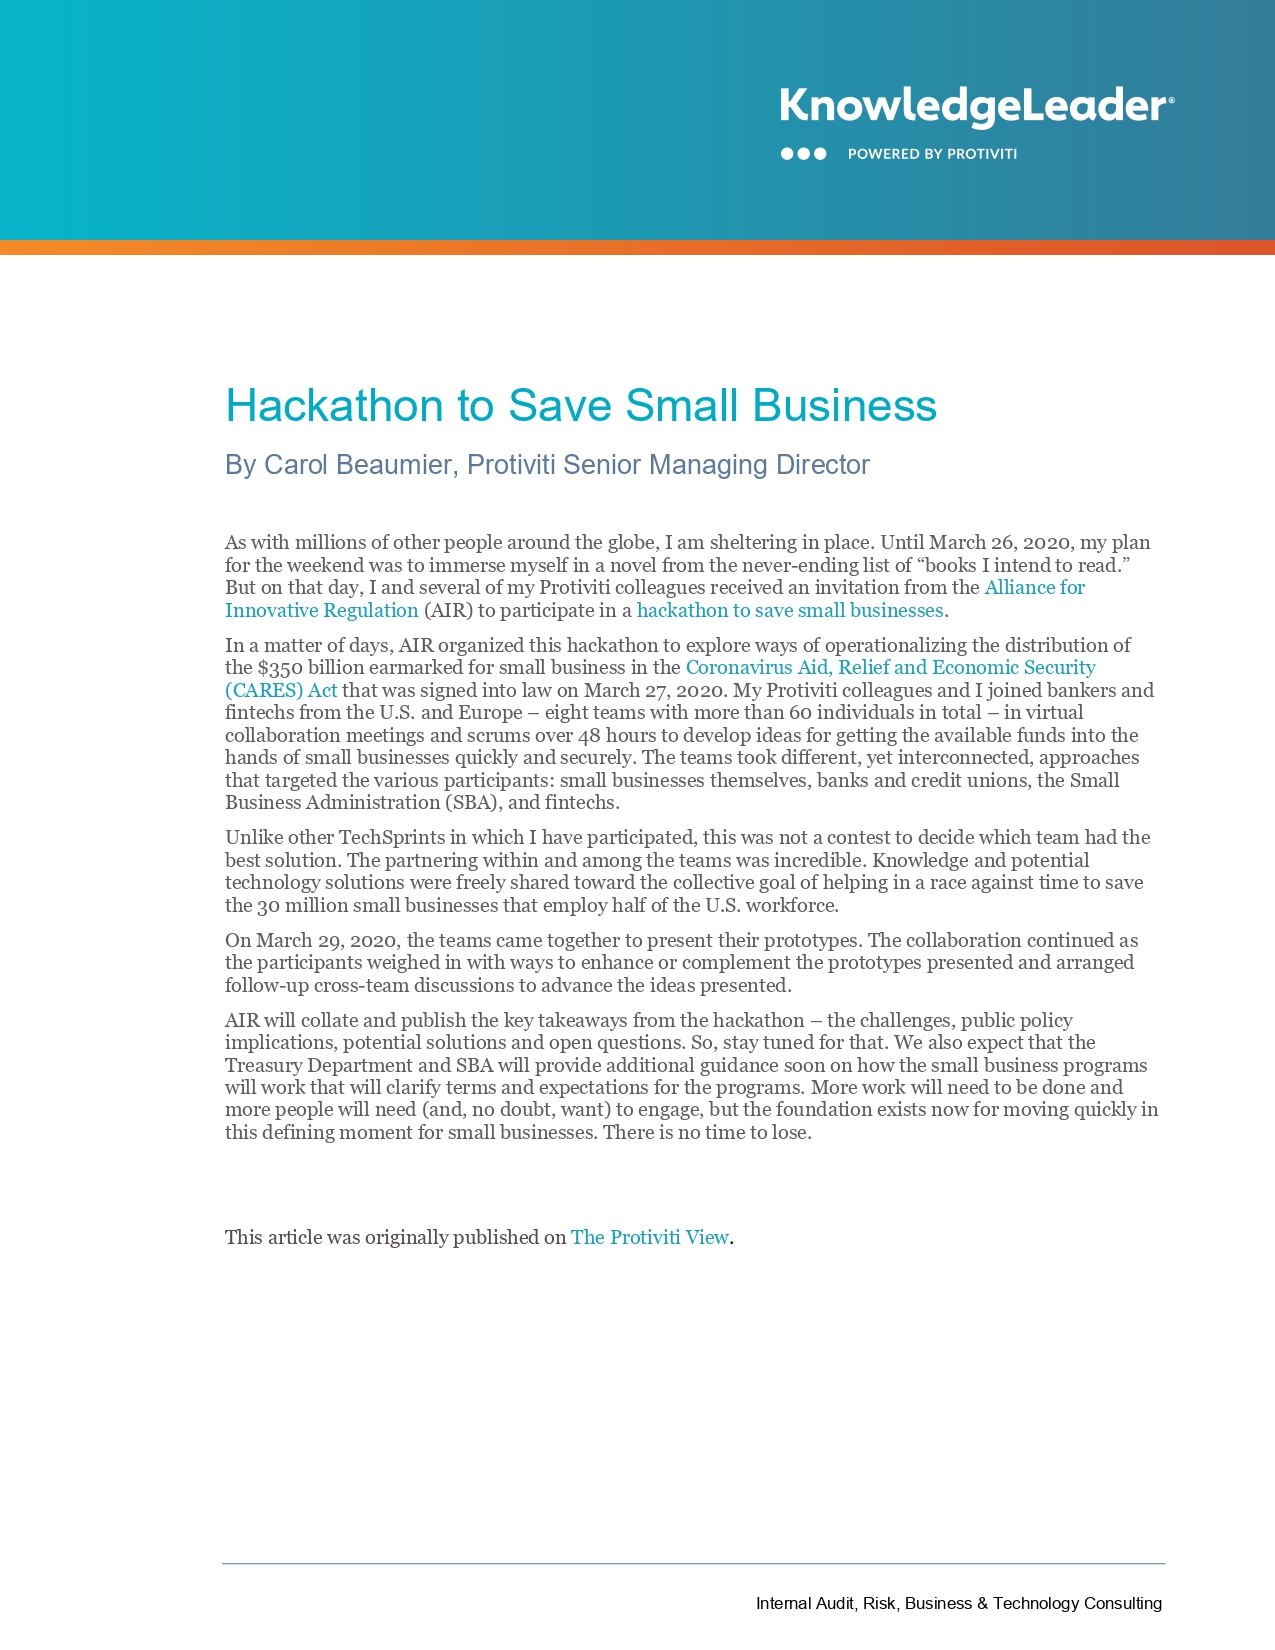 Hackathon to Save Small Business